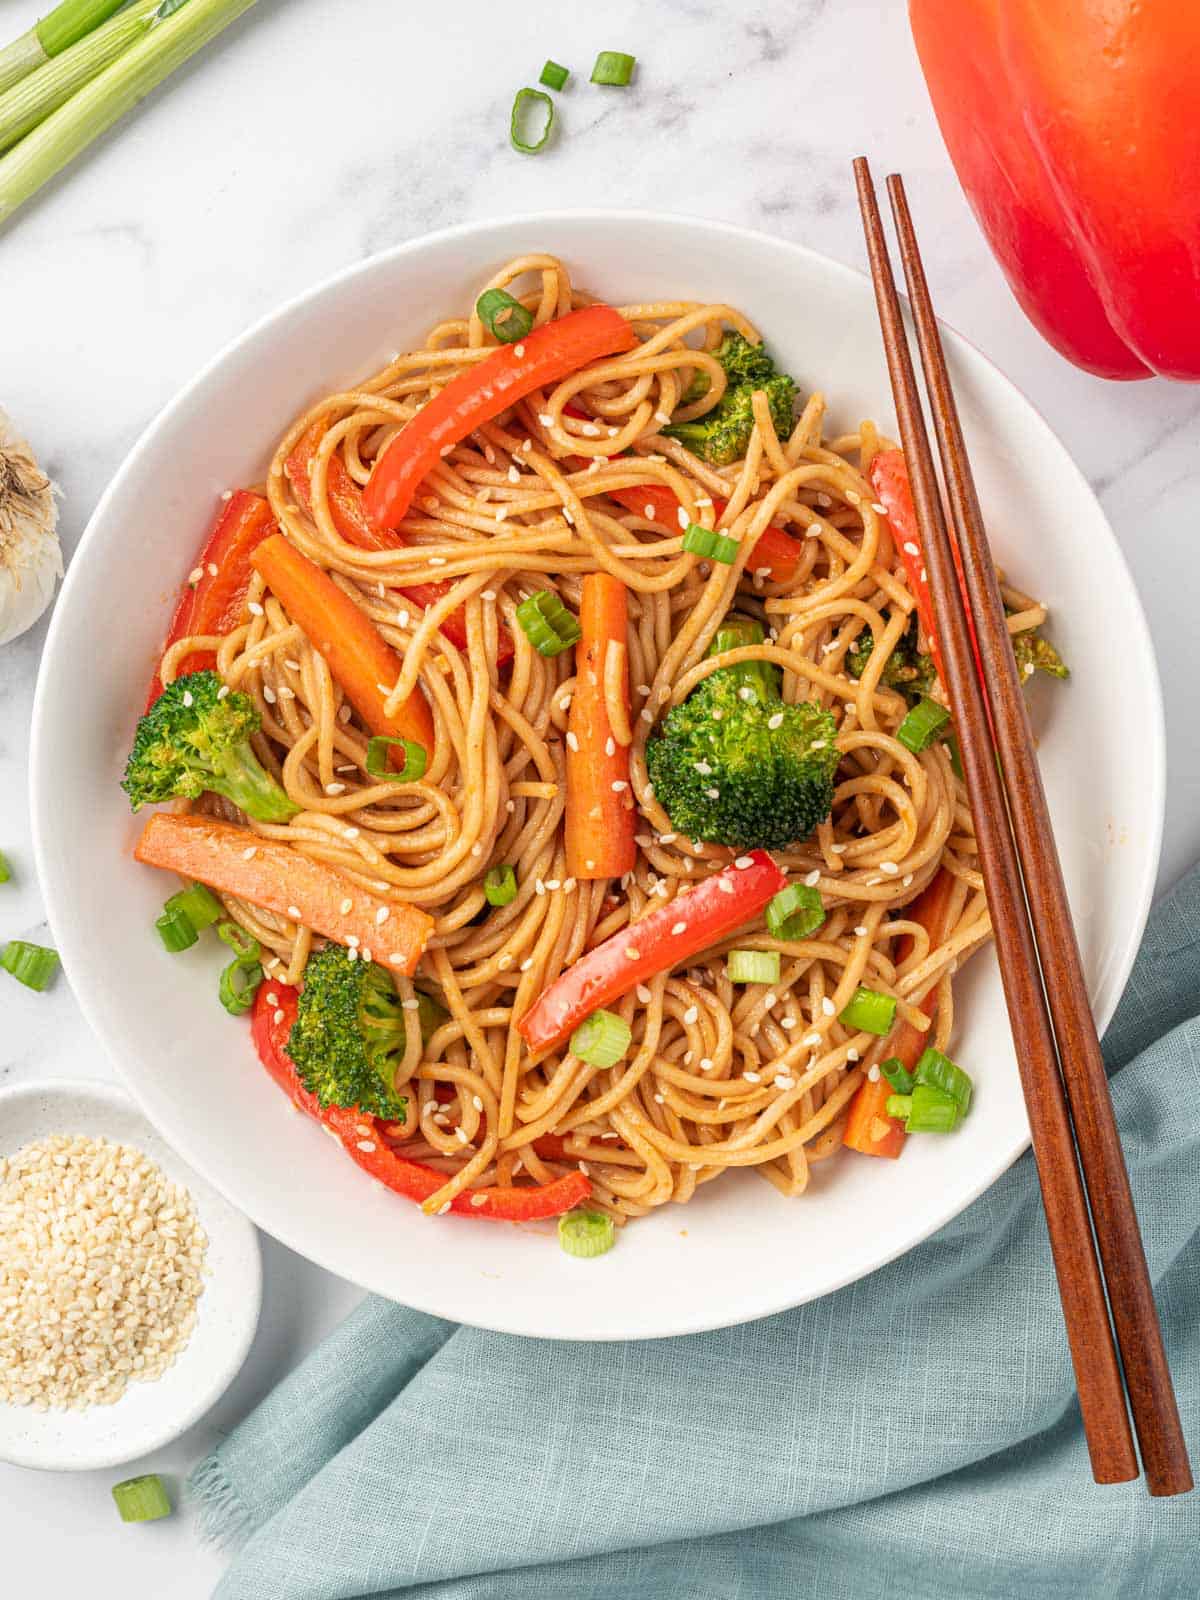 A bowl of vegetarian lo mein noodles.